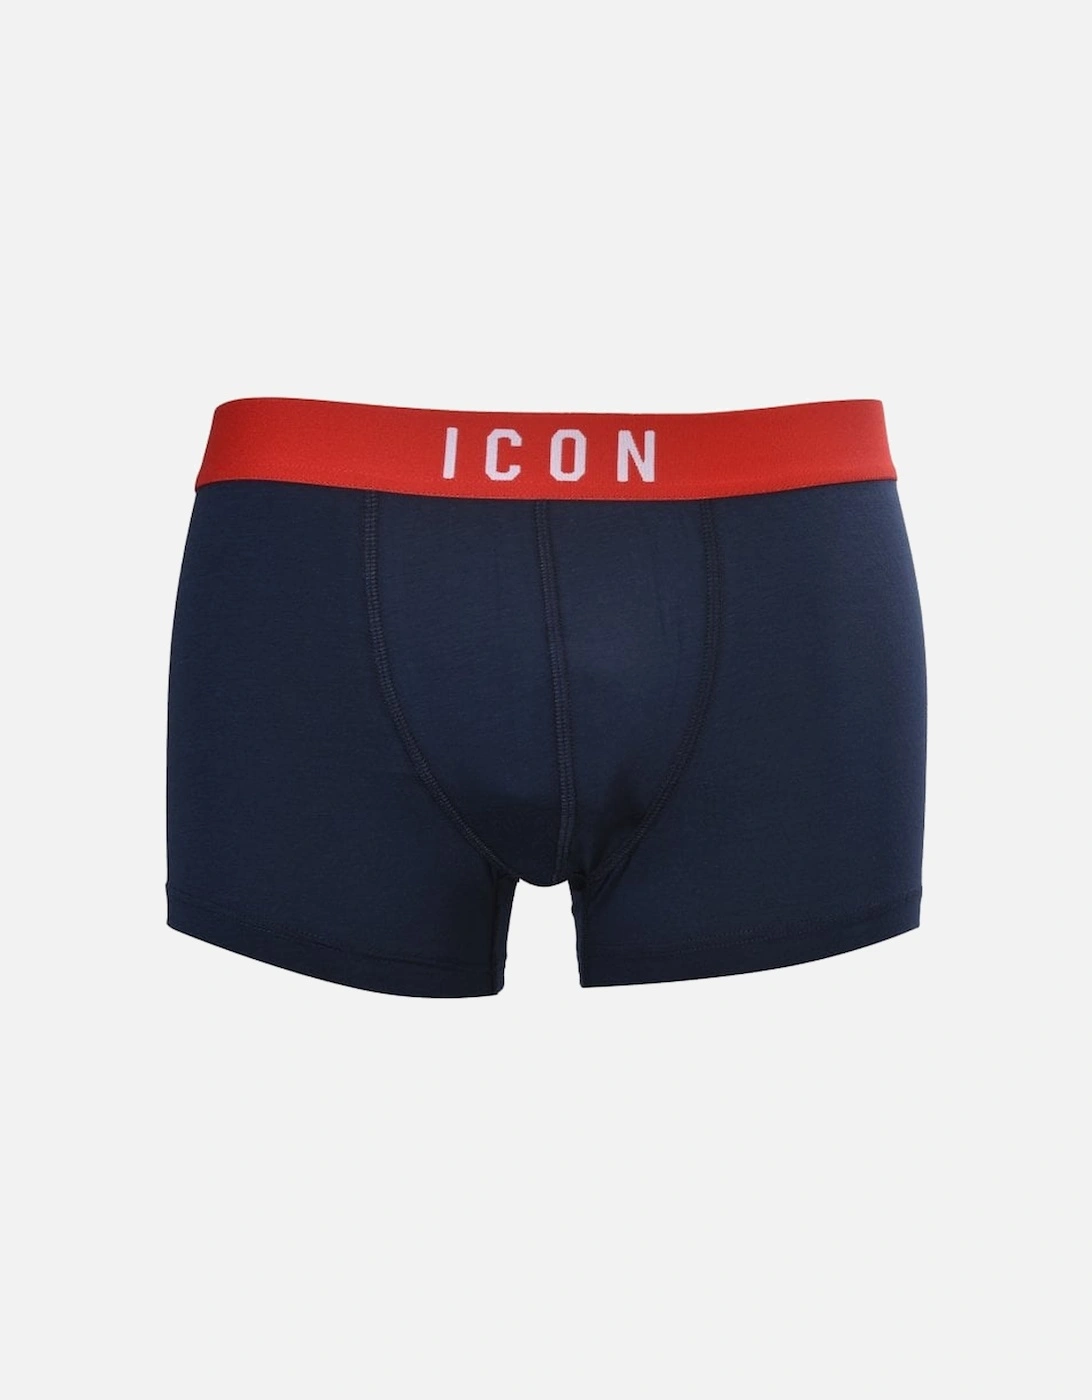 ICON Logo Boxer Trunk, Navy/red, 5 of 4